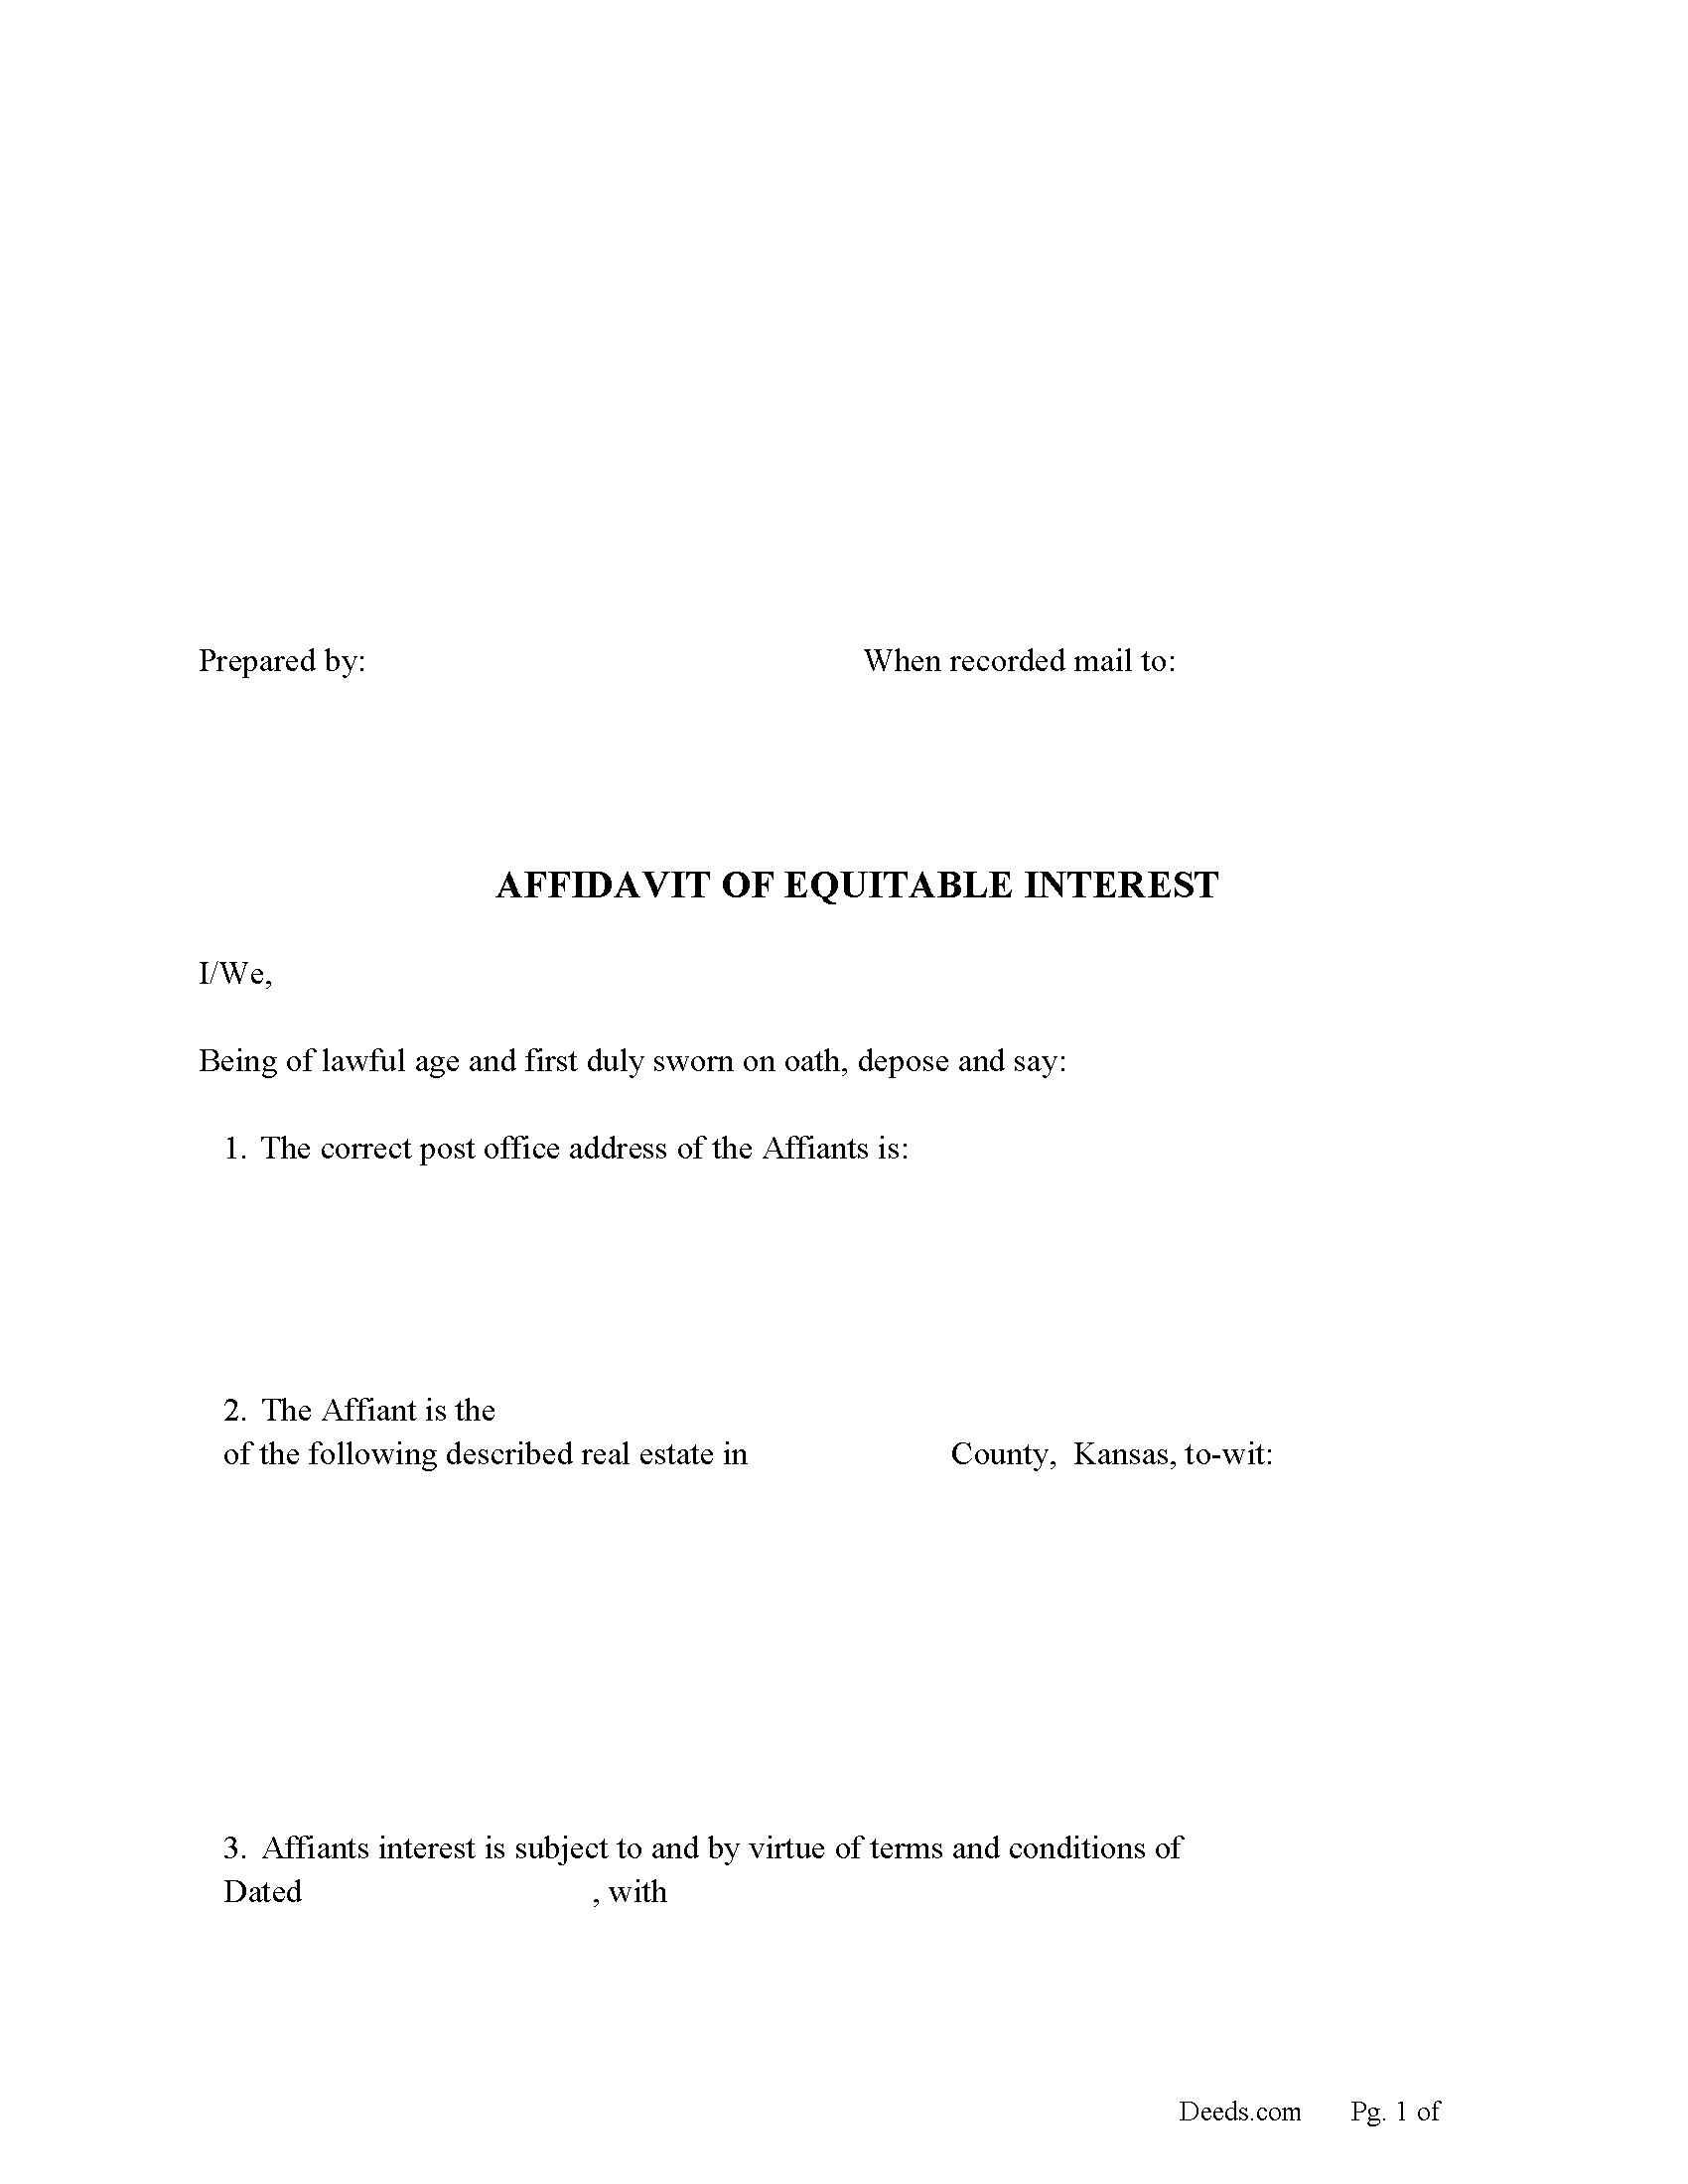 Russell County Affidavit for Equitable Interest Form